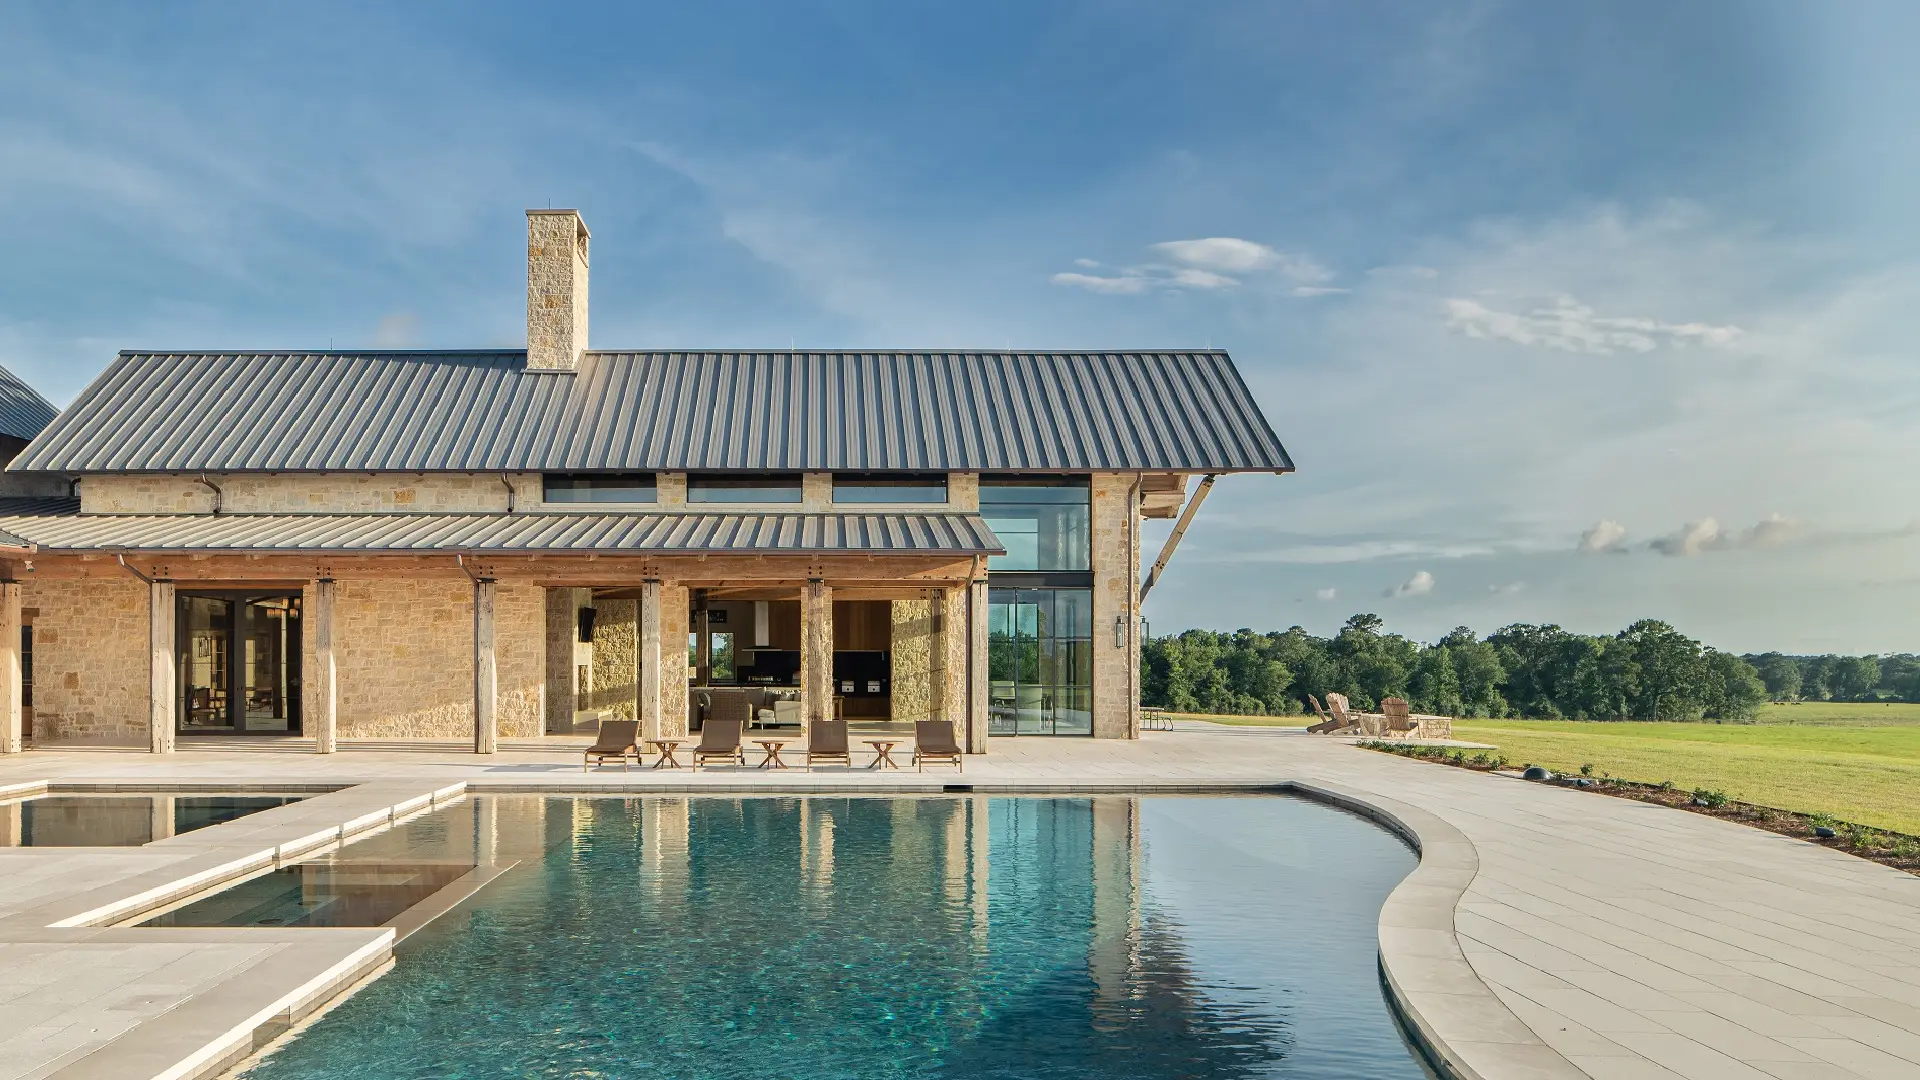 Exterior view of the pool at Texas Ranch, a custom home designed and built by Farmer Payne Architects.